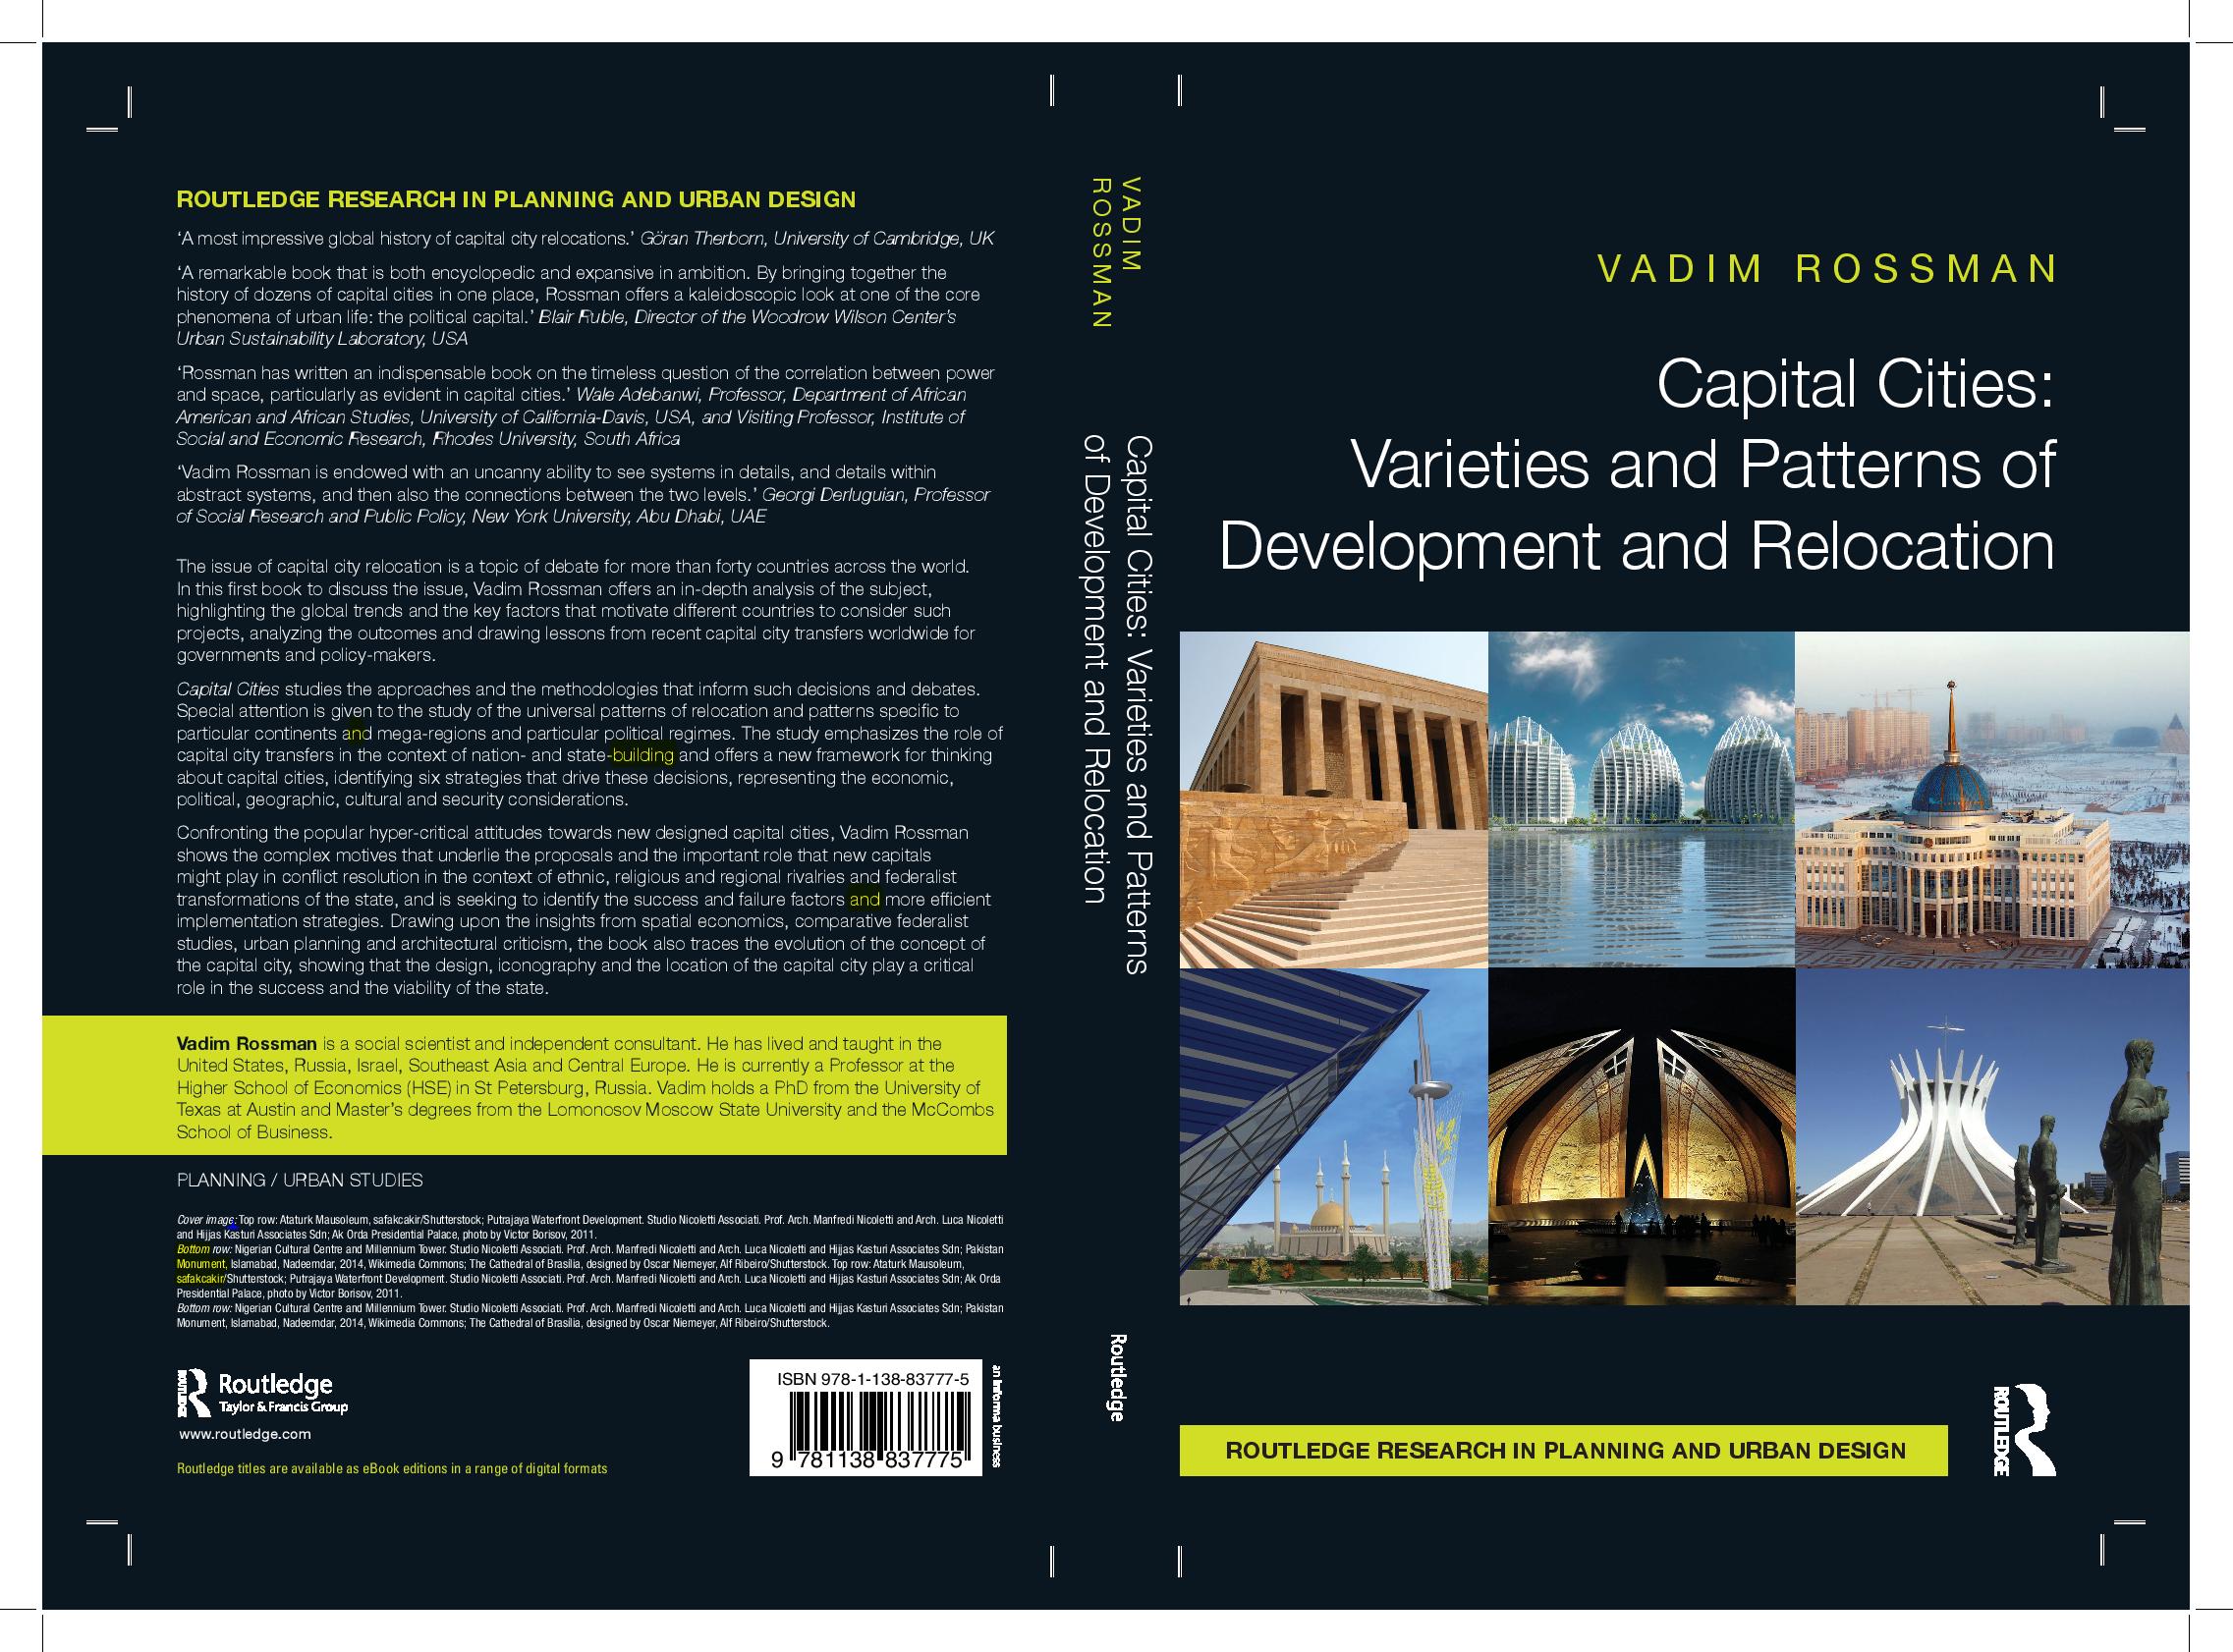 Capital Cities: Varieties and Patterns of Development and Relocation